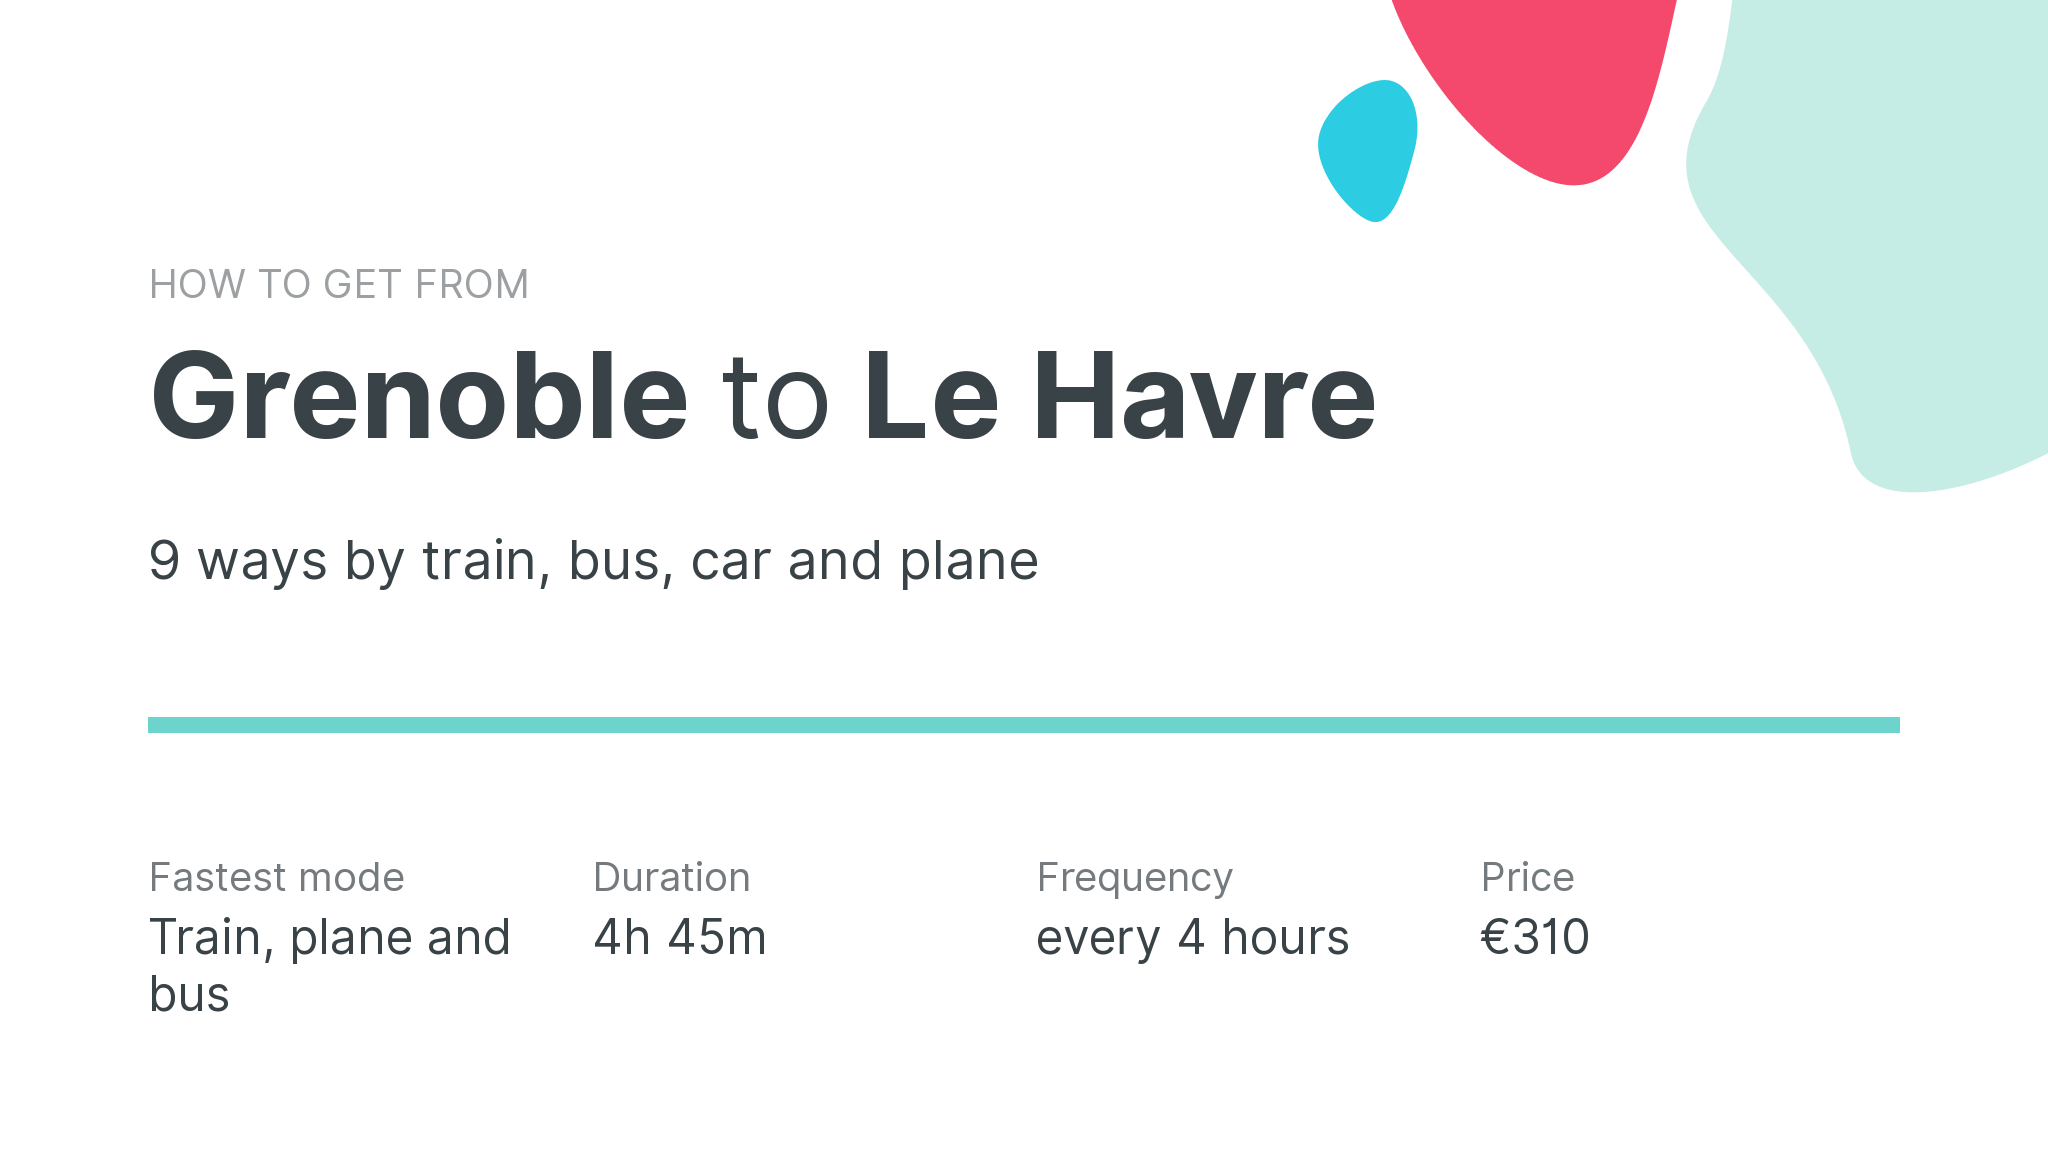 How do I get from Grenoble to Le Havre